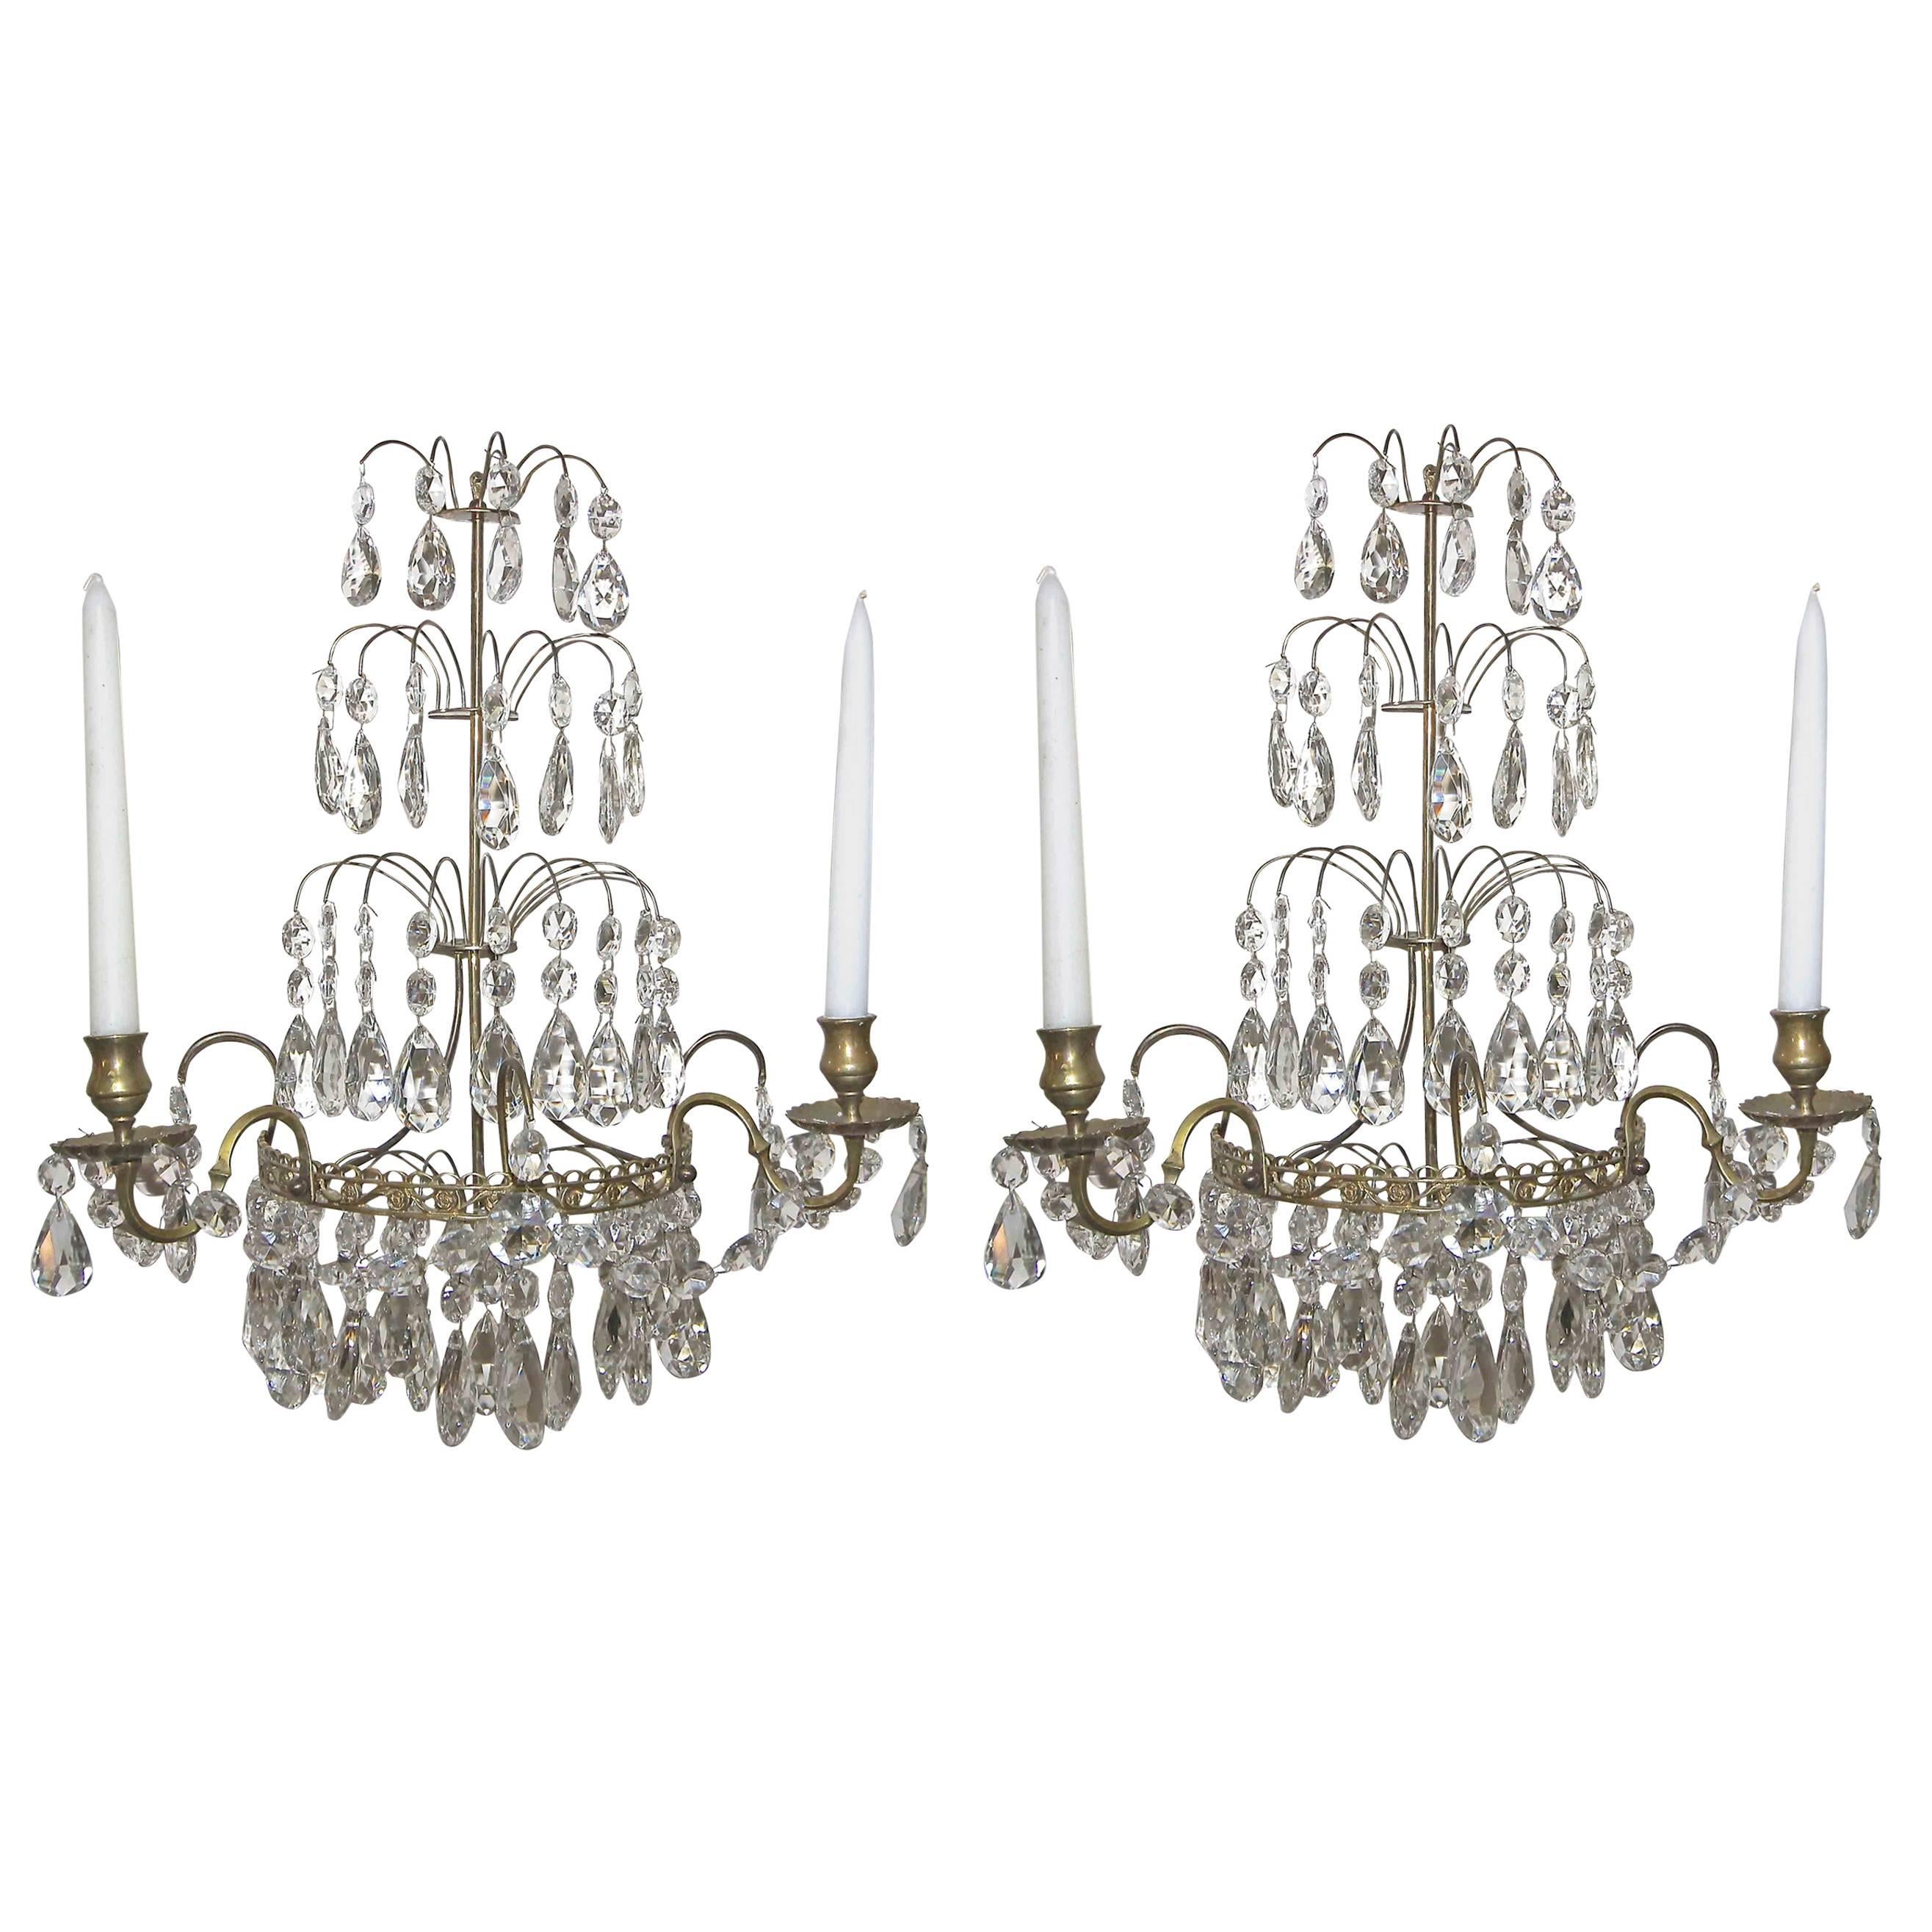 Pair of Swedish Gustavian Style Crystal and Brass Candle Wall Sconces For Sale